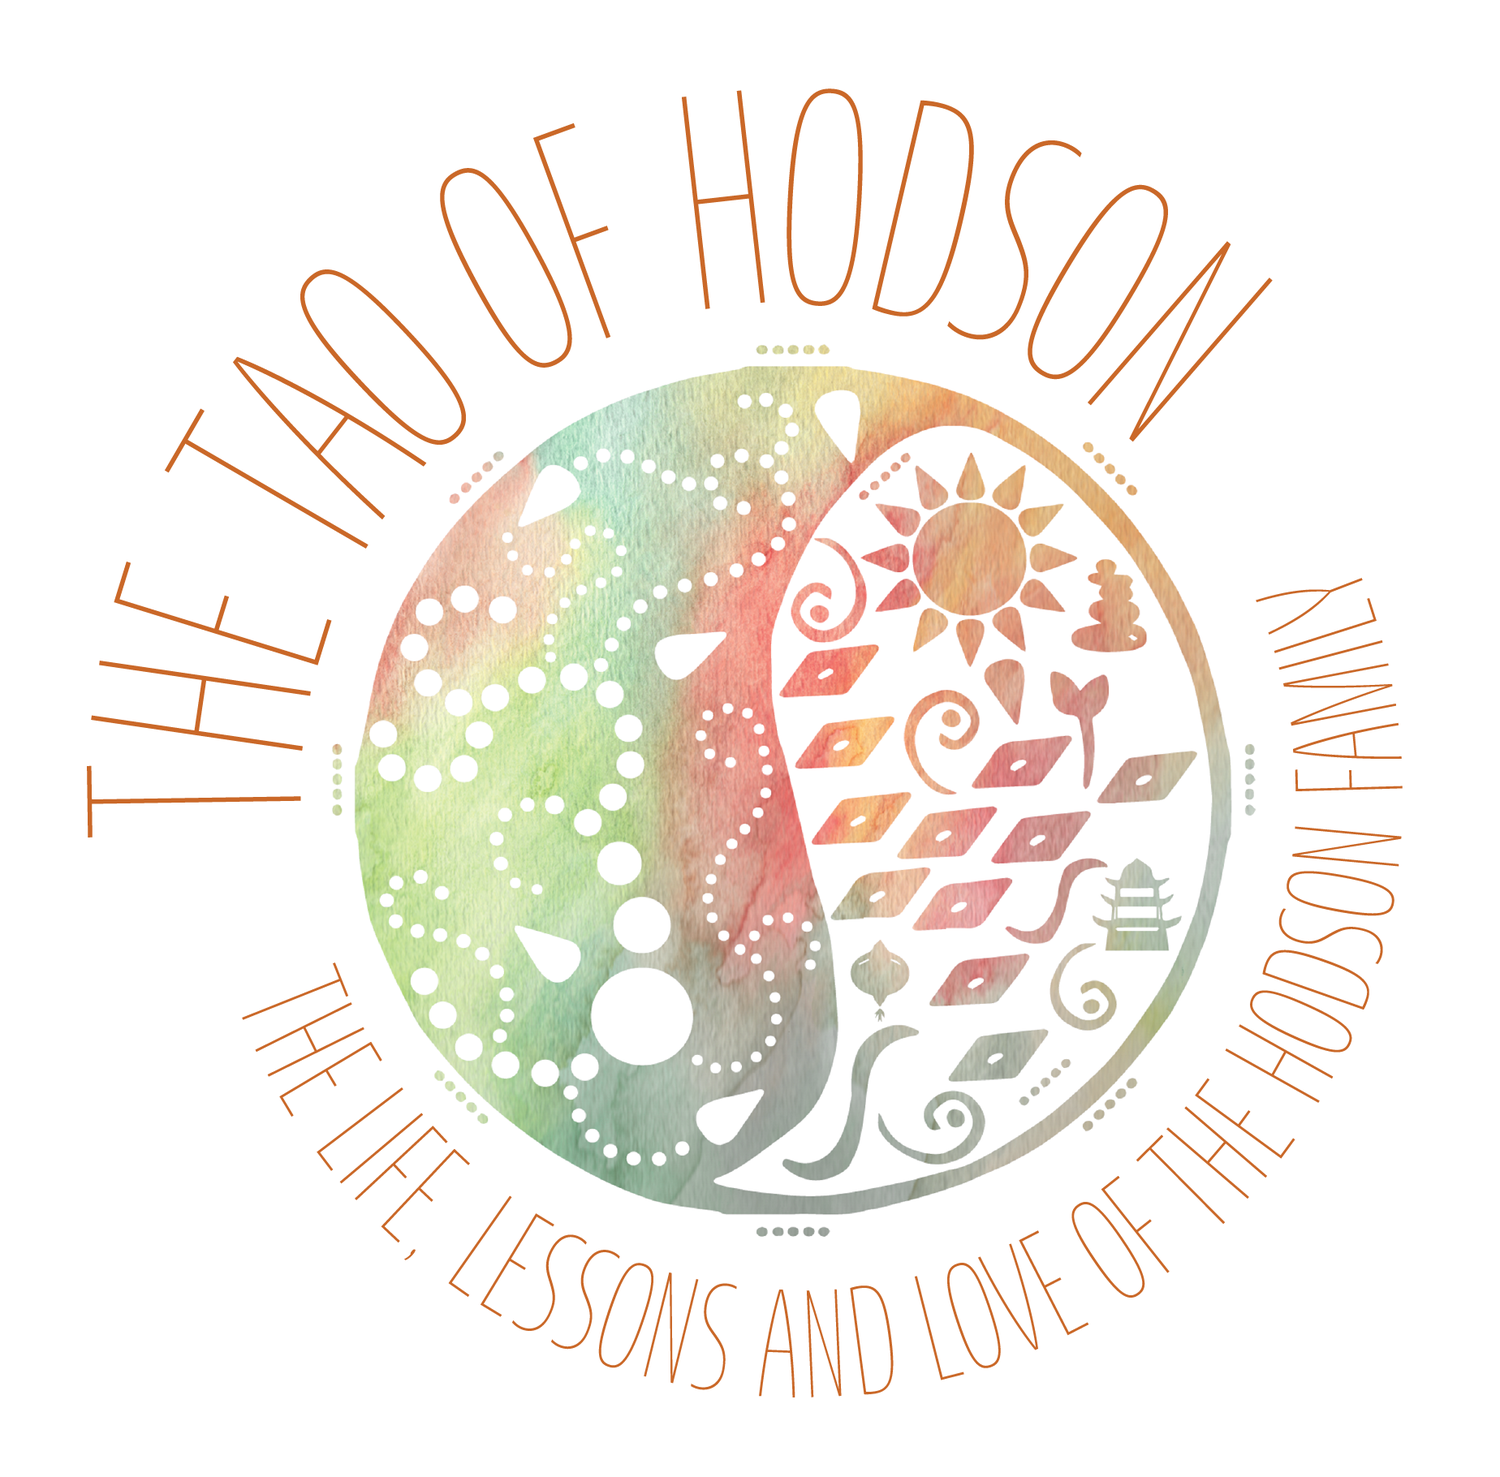 The Tao of Hodson